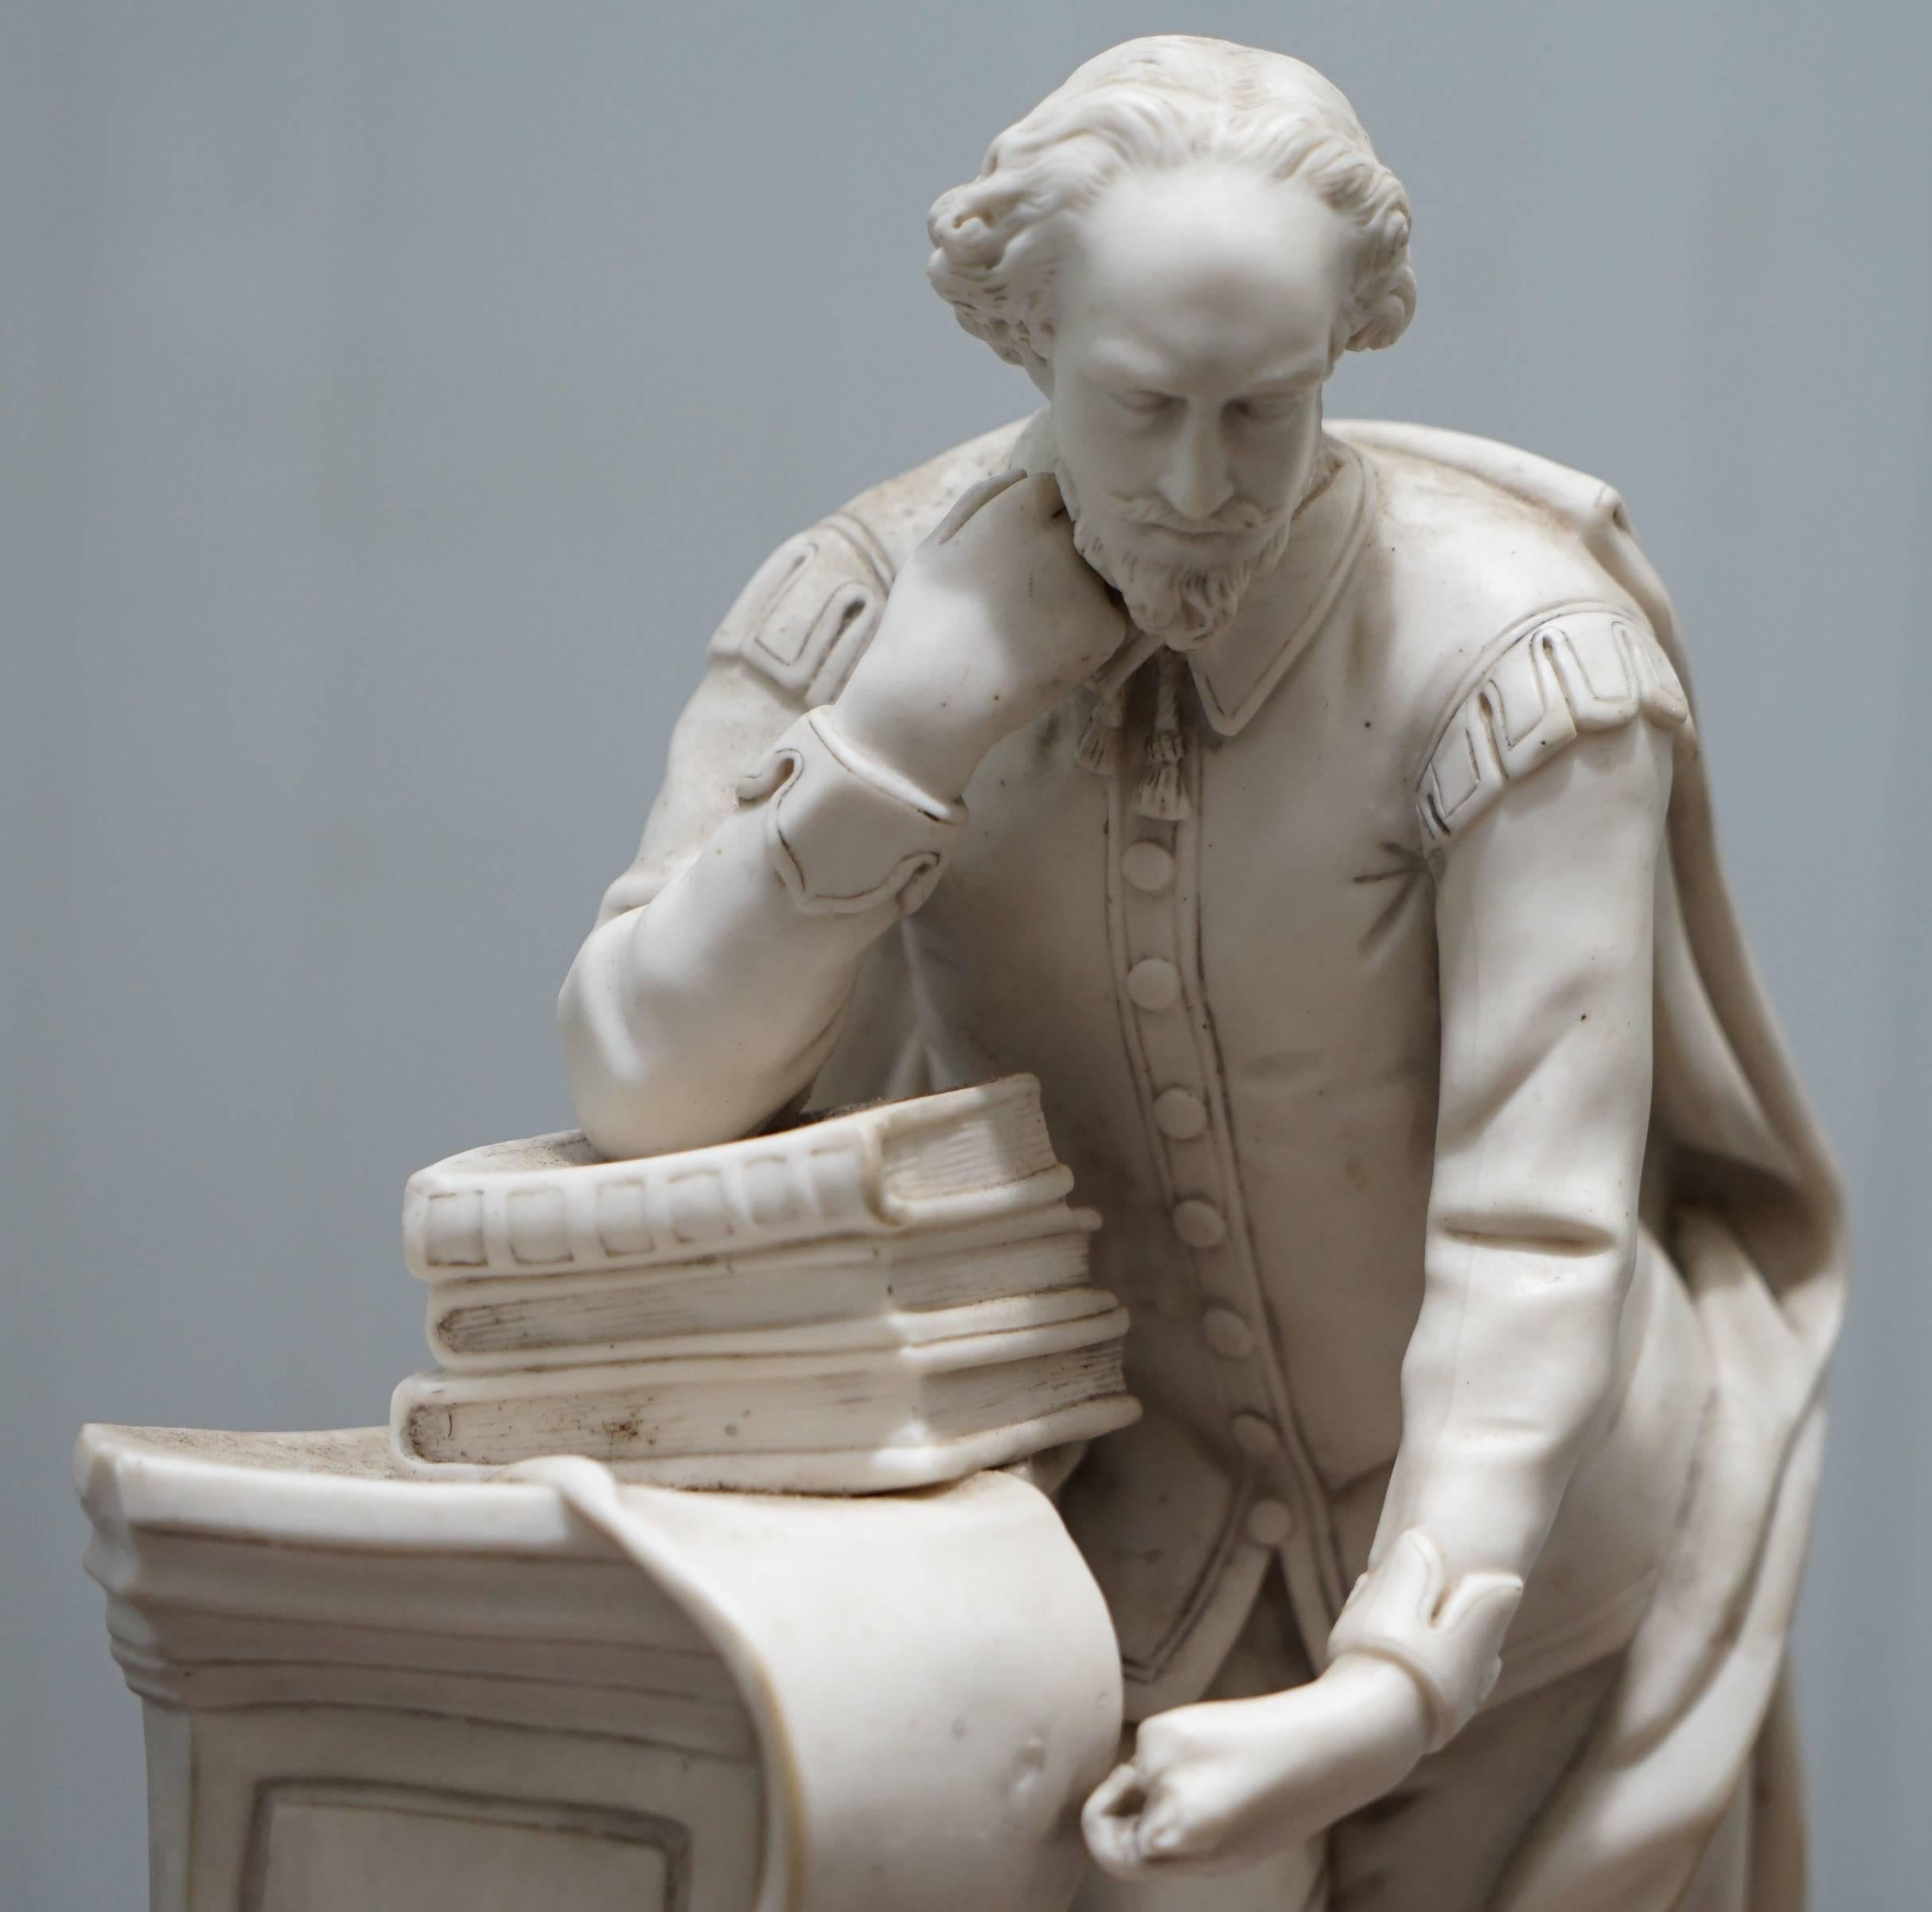 Hand-Crafted Highly Detailed Parian Marble Statue of William Shakespeare Must See, circa 1860